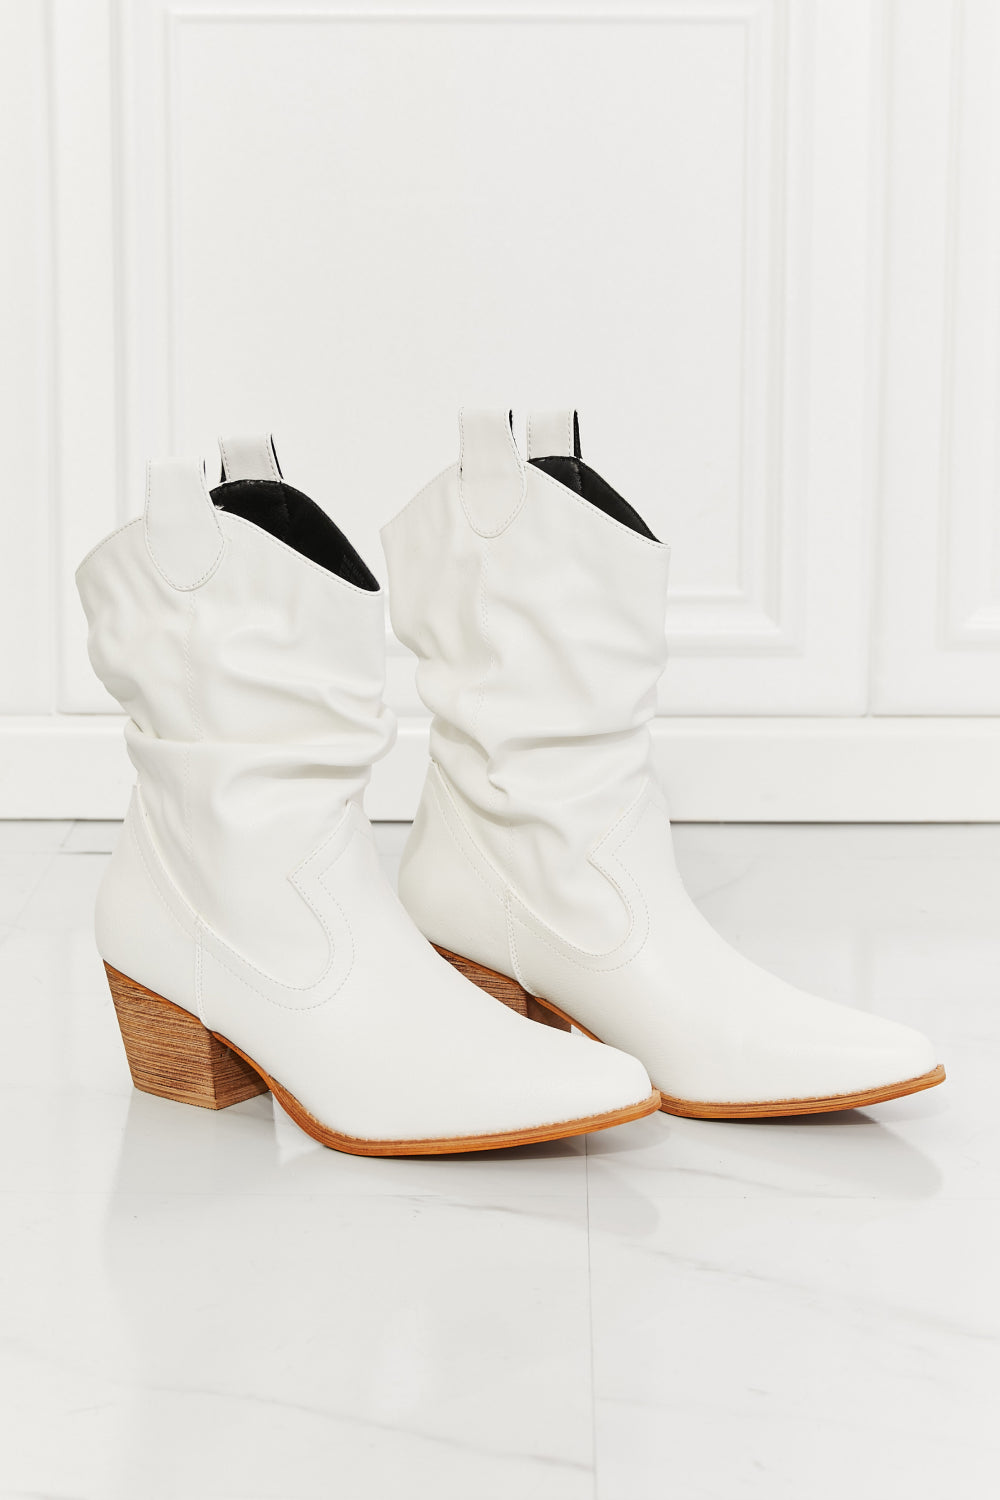 Better in Texas Scrunch Cowboy Boots in White | KIKI COUTURE